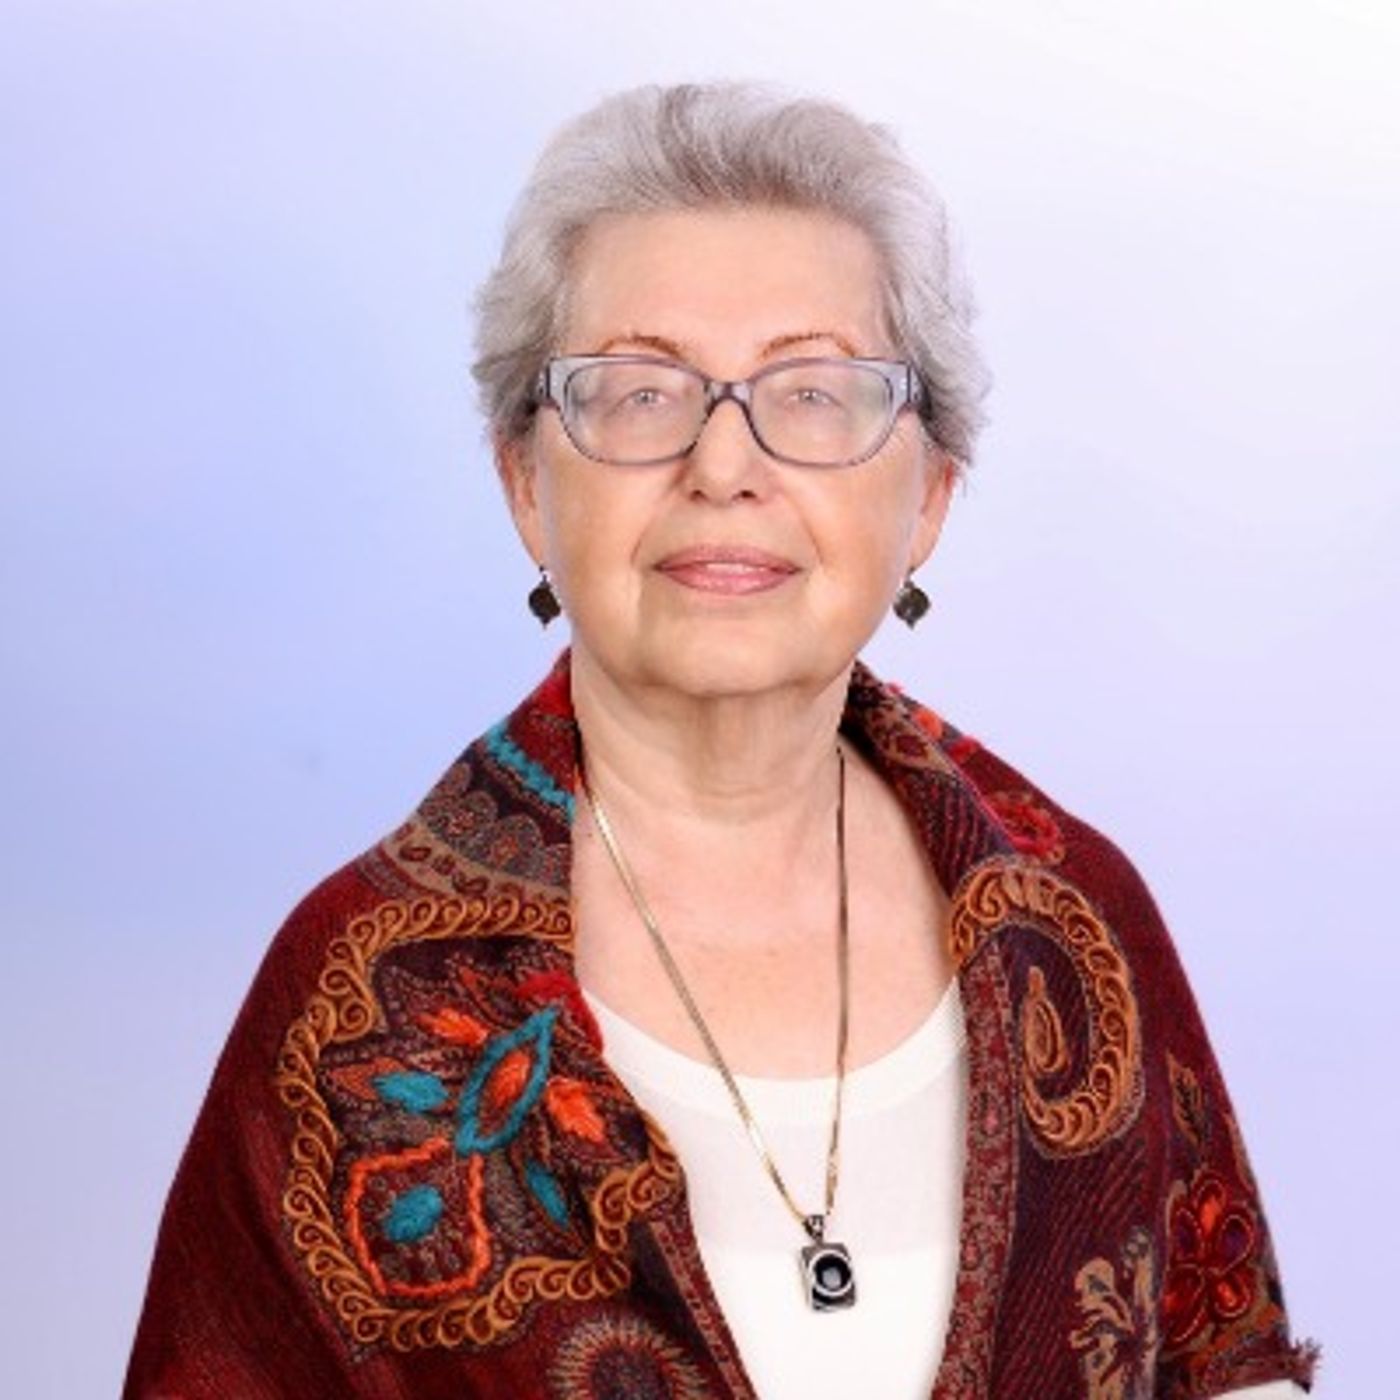 Interview with Miriam Divinsky, Ph.D. Author of “Playing The Game Of Life And Business To Win-the Search For Truth And Enlightenment”